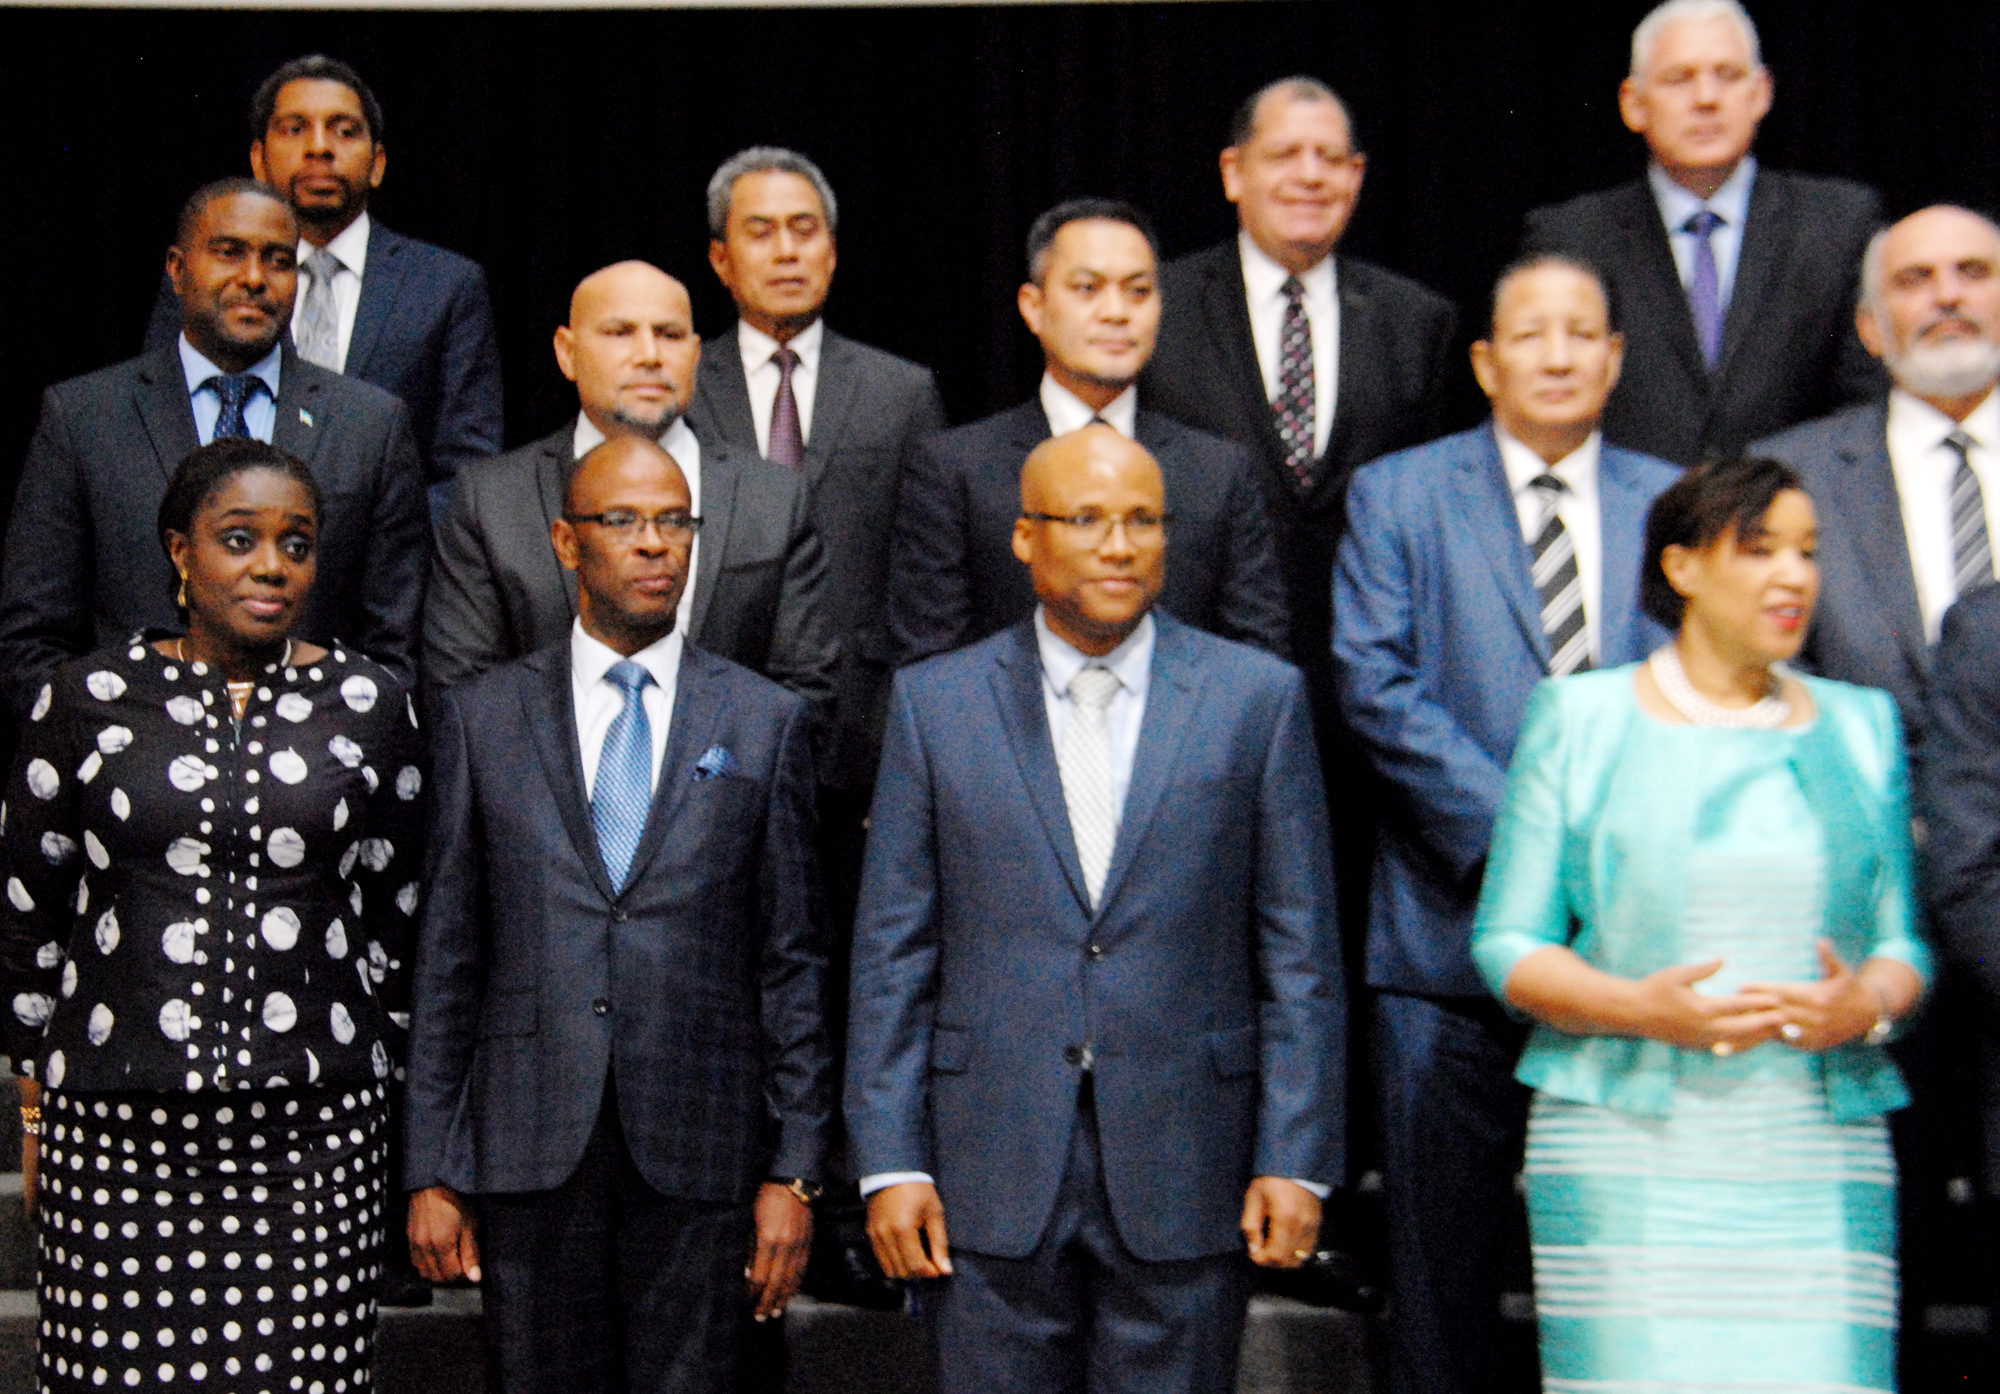 COMMONWEALTH FINANCE MINISTER MEETING -4